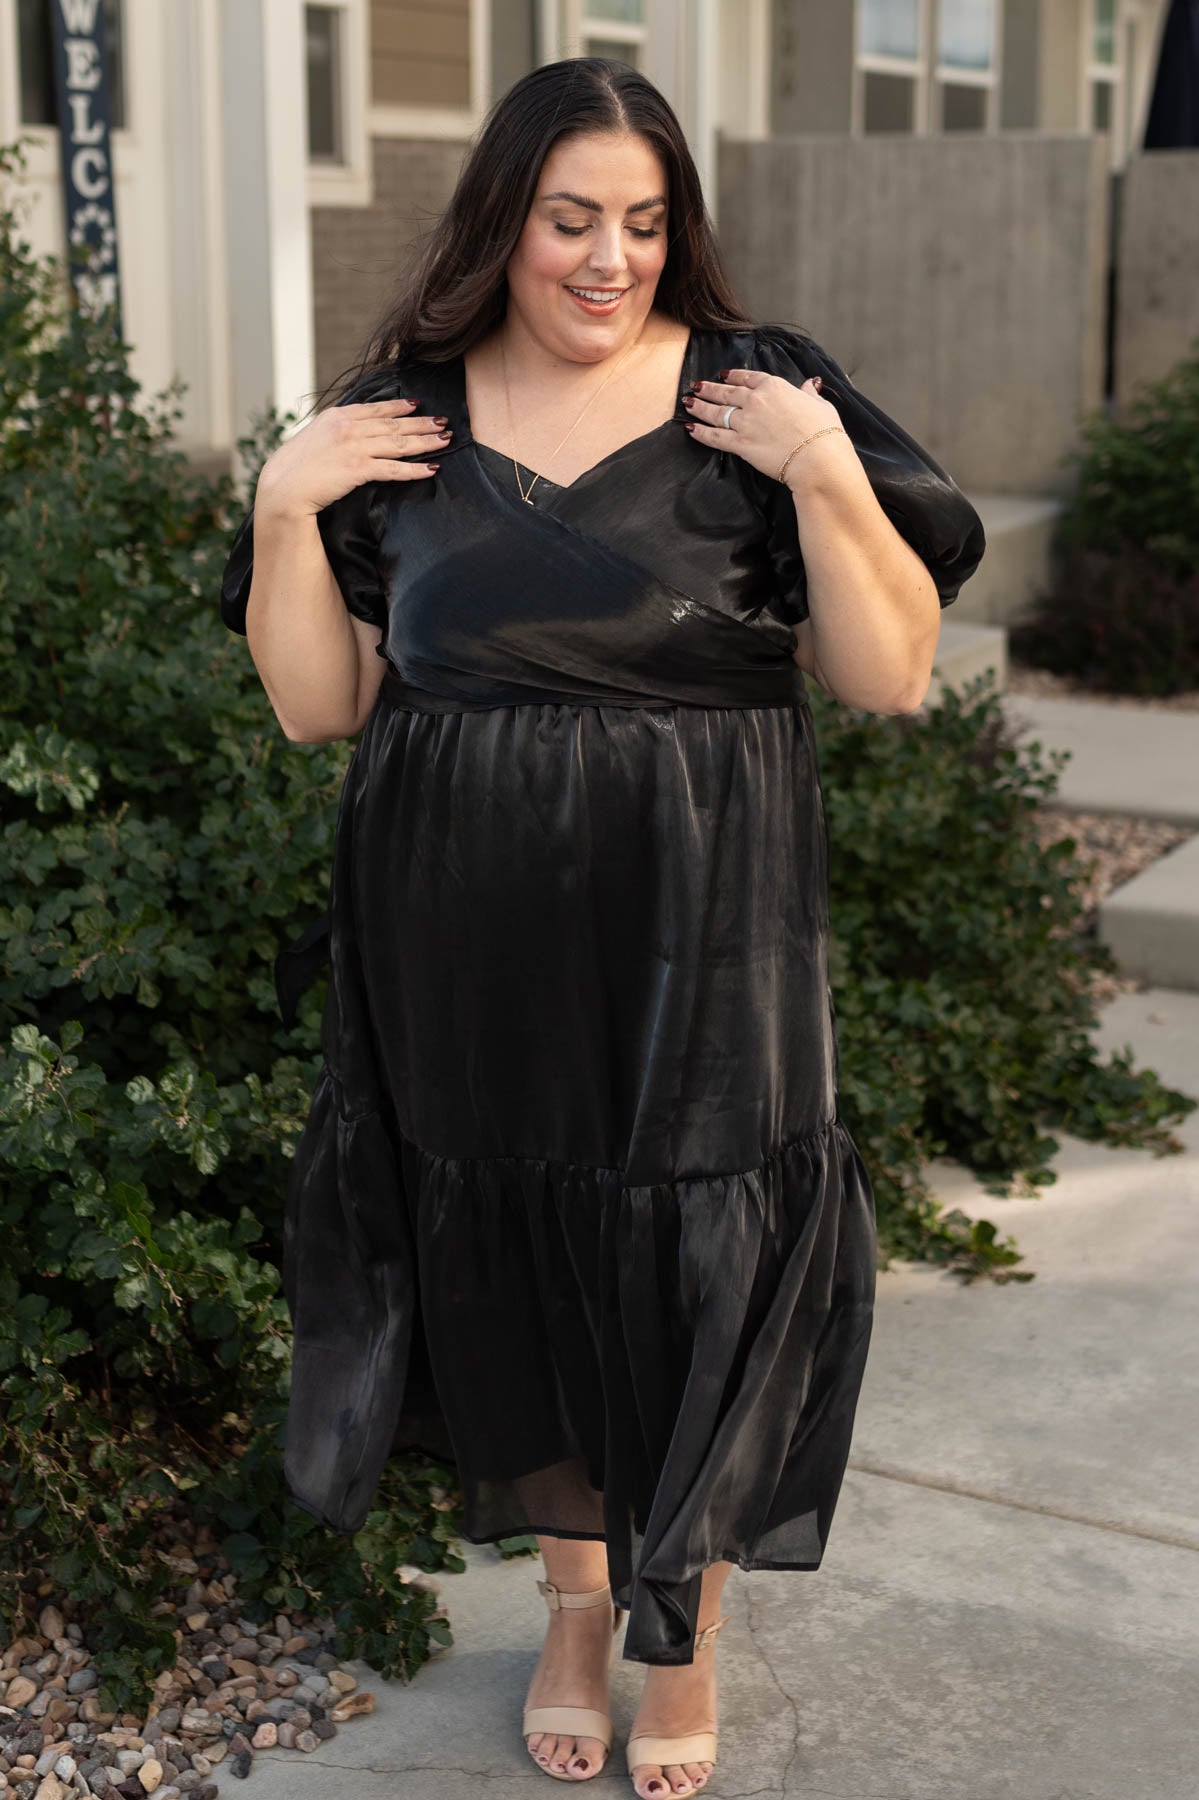 Plus size black dress with a sweetheart neck and ties at the back